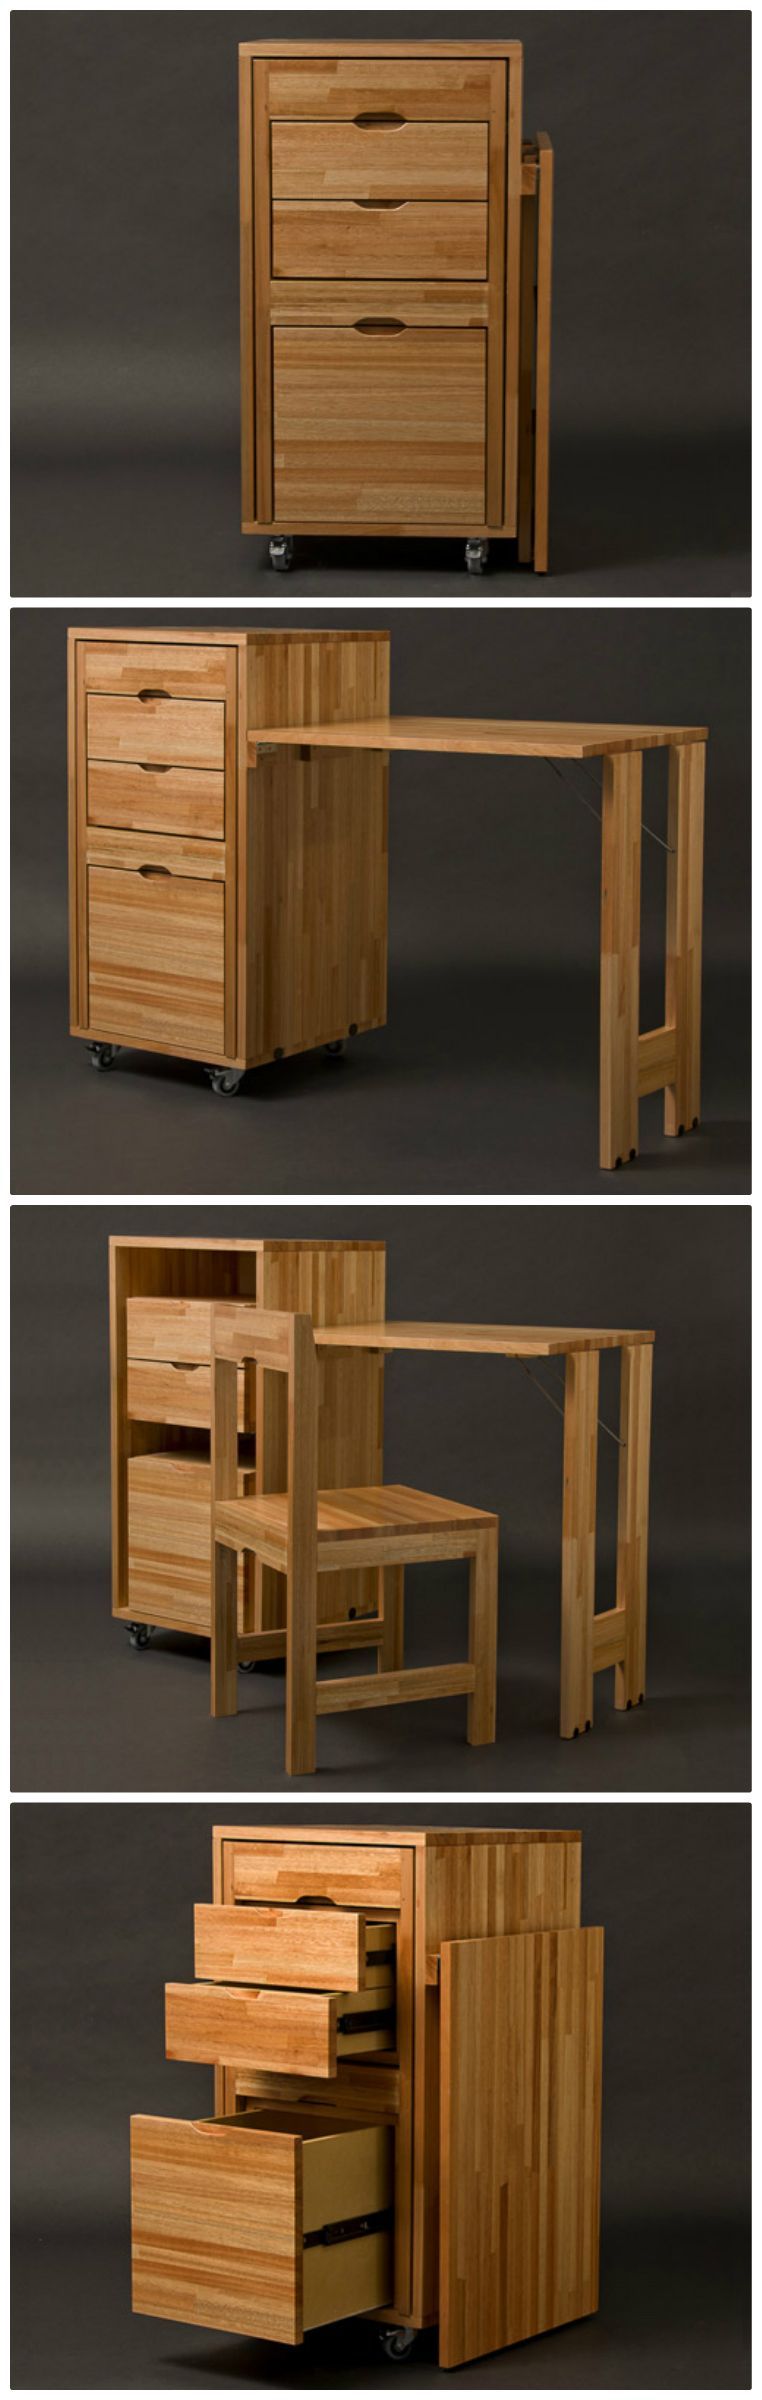 Cabinet with built-in chair and desk